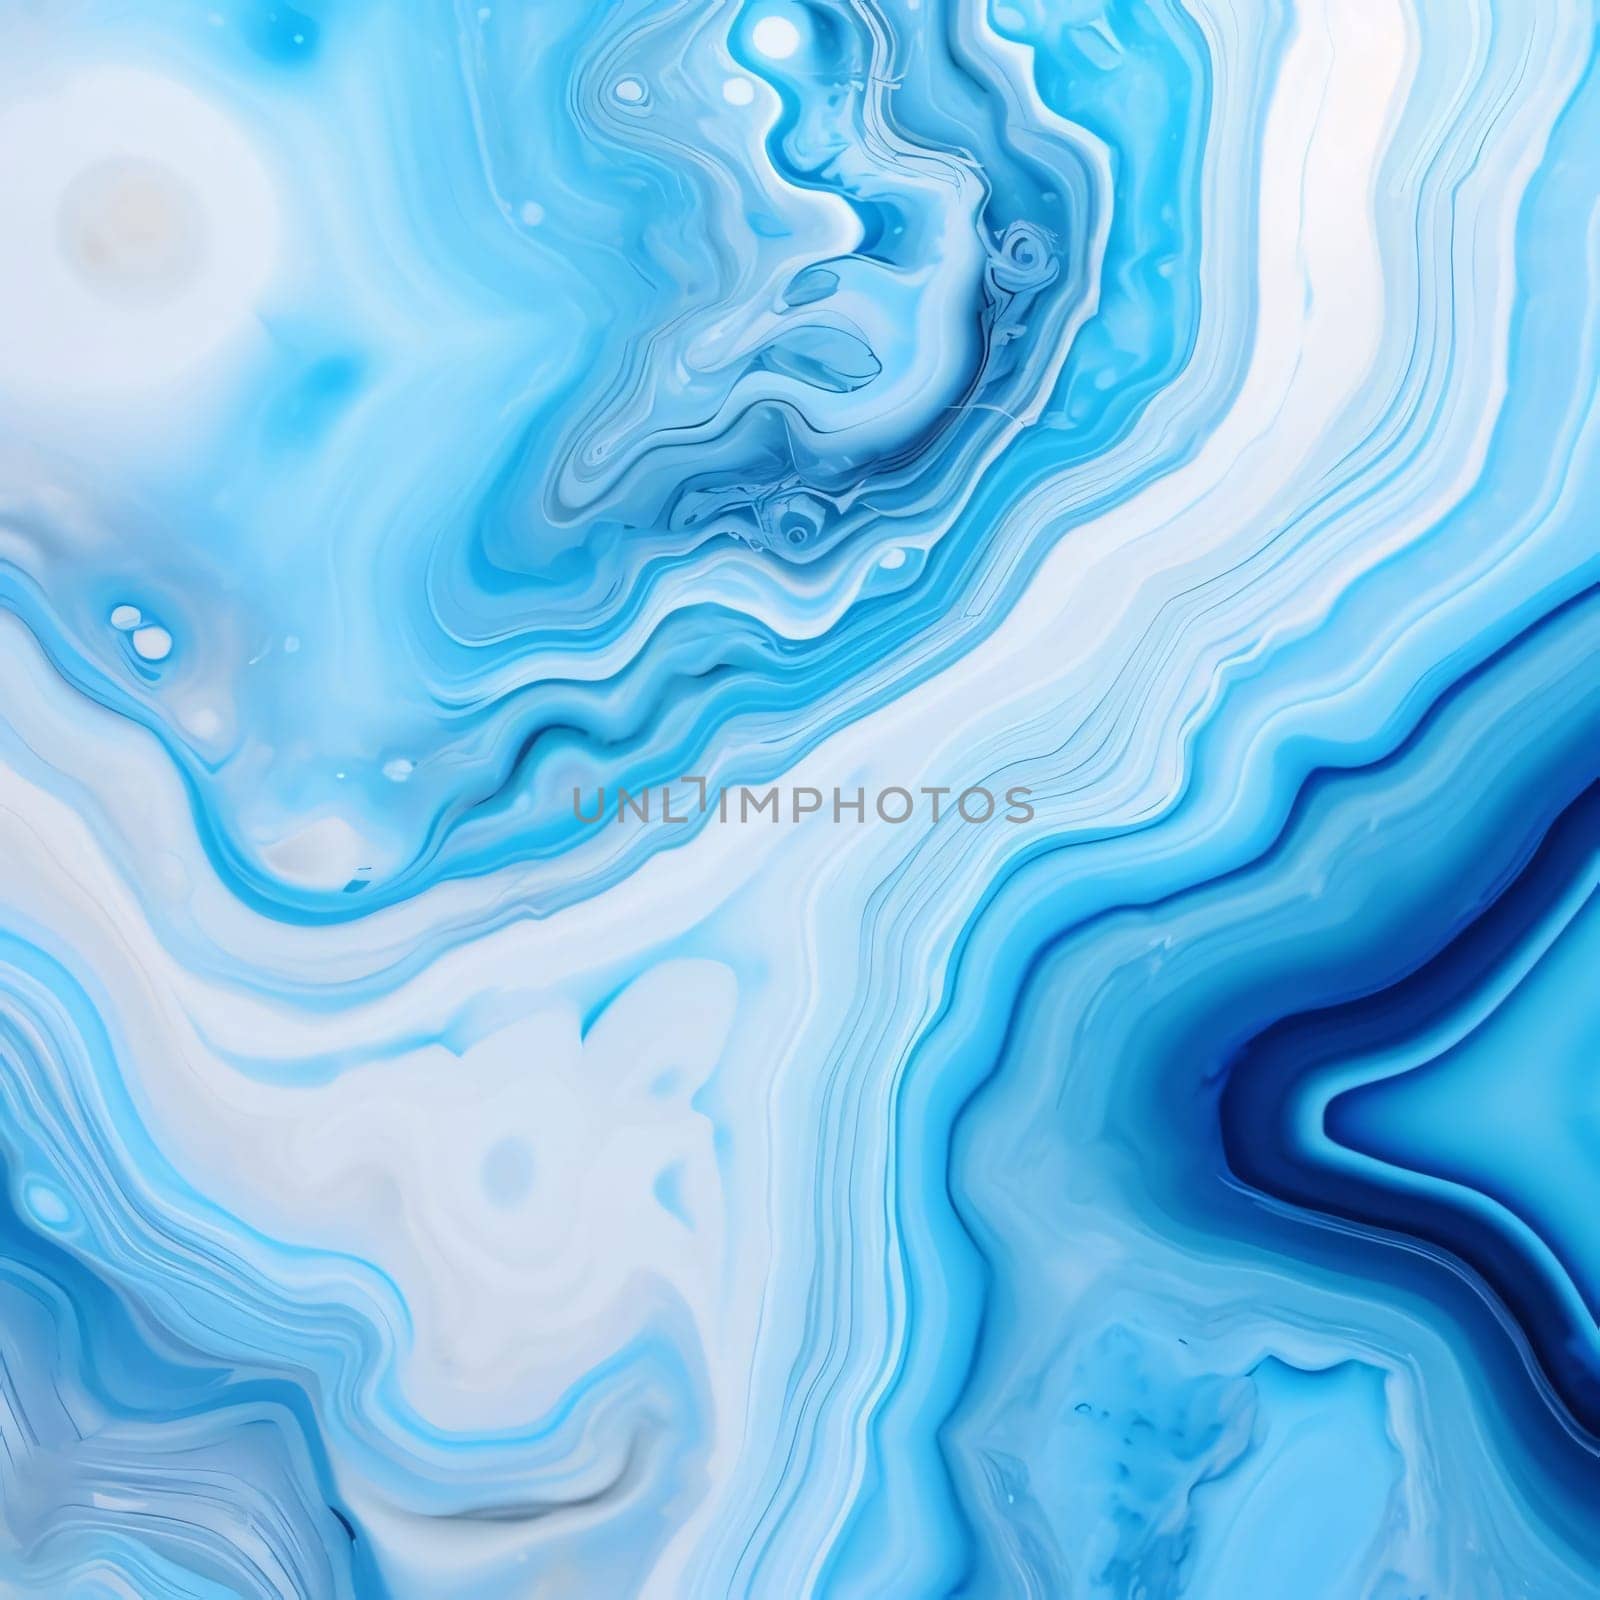 Abstract background design: abstract background with blue and white marble pattern, digitally generated image